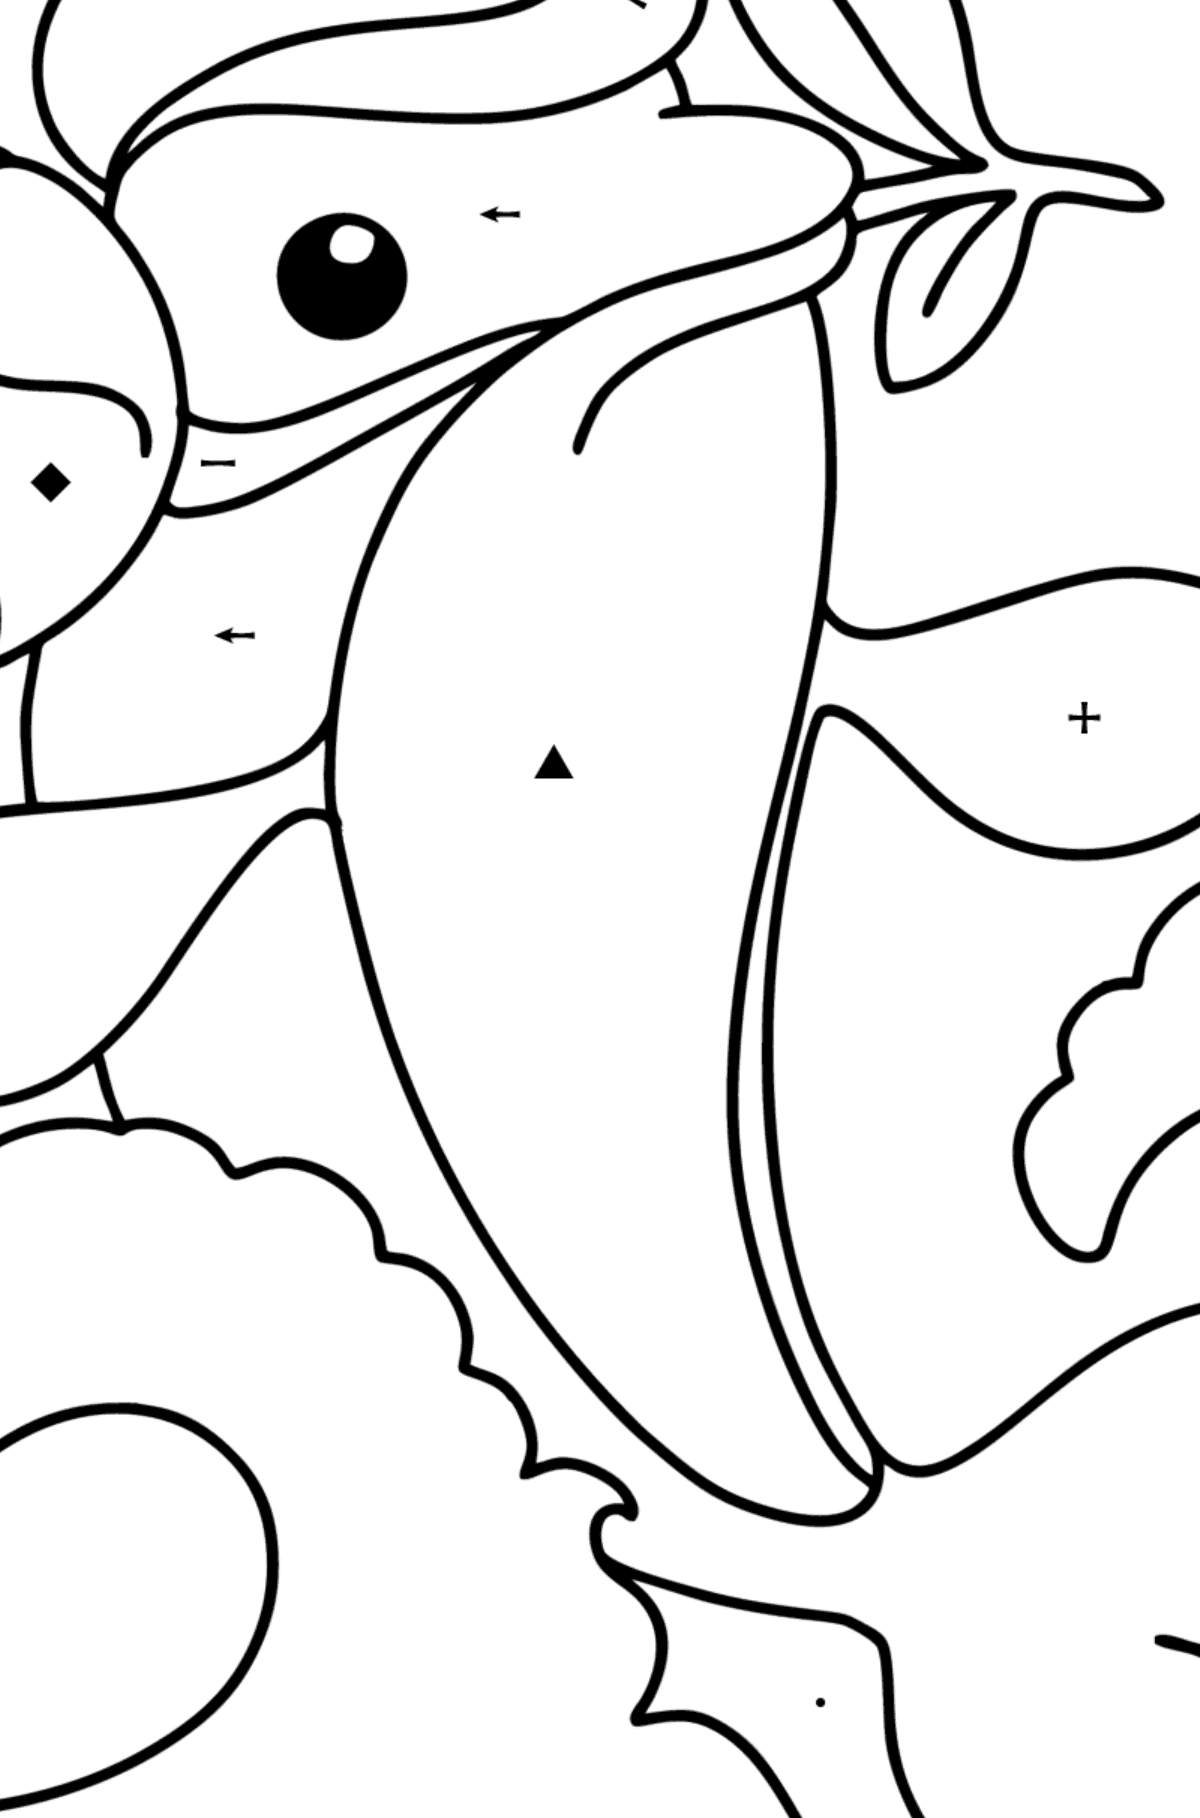 Cute Dolphin coloring page - Coloring by Symbols for Kids